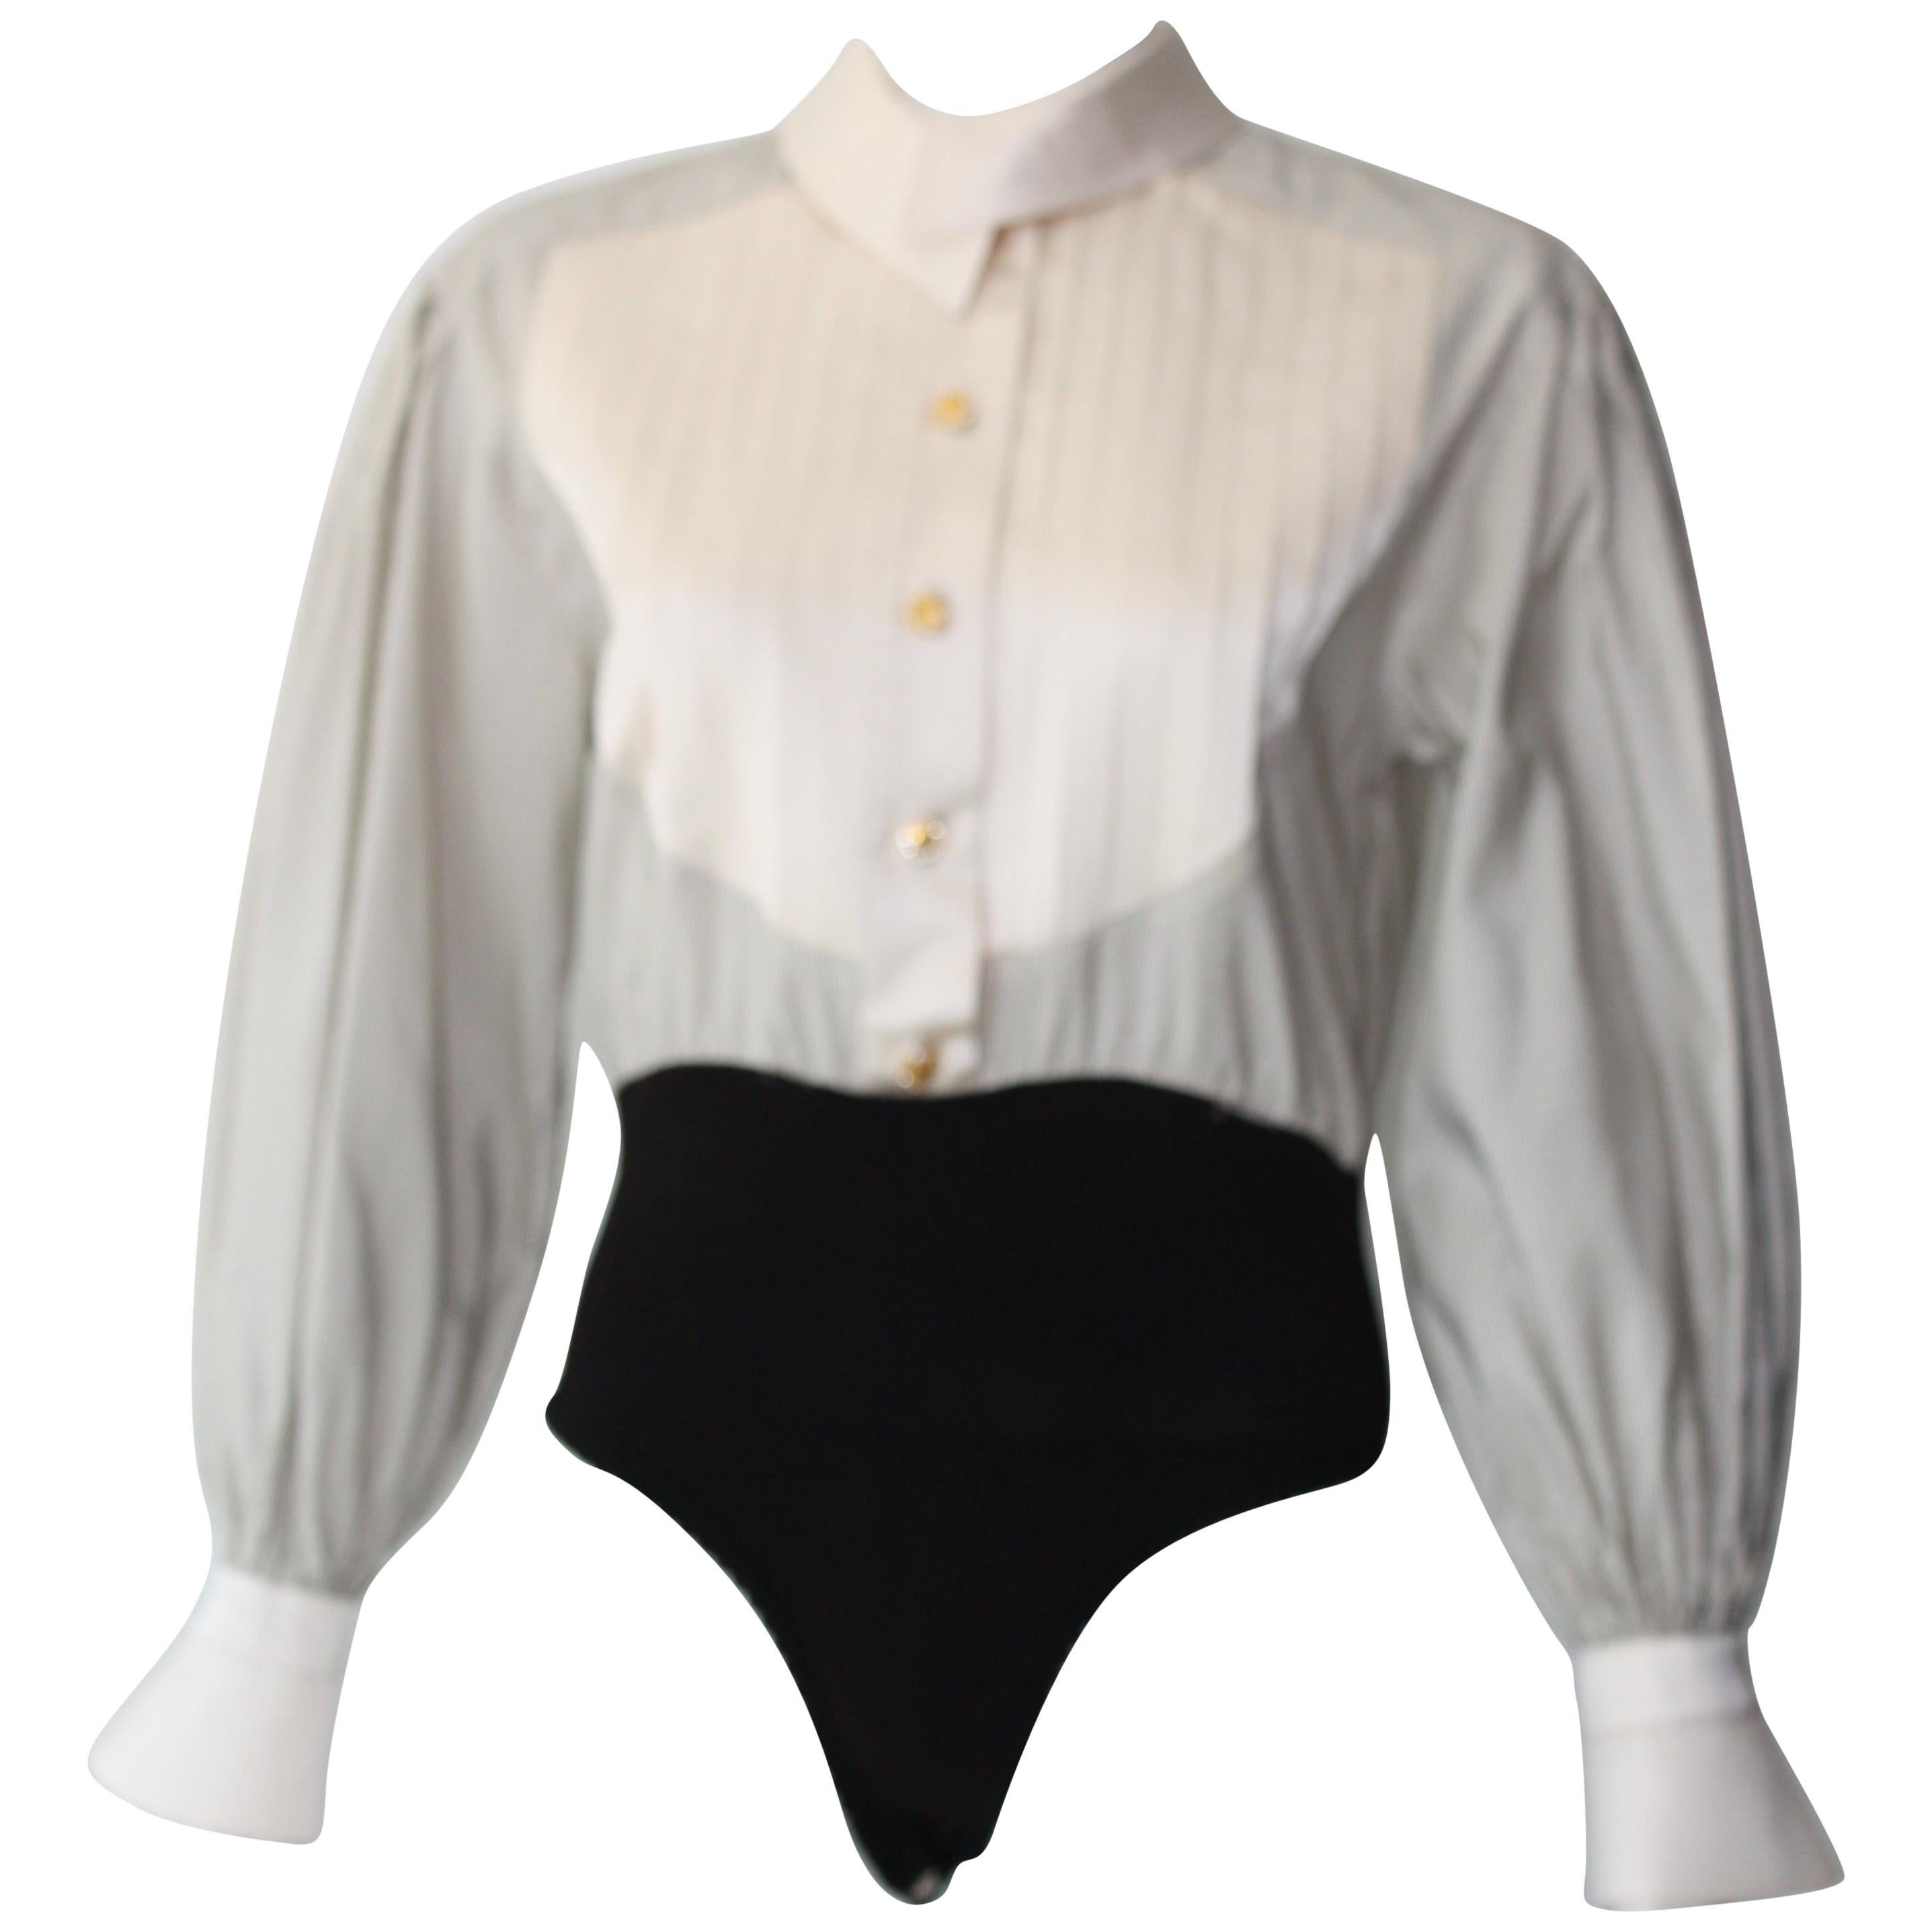 90s Vintage Escada Tuxedo Body Suit Vintage. 
Details include, Pinstripe arms and pleated satin bodice. Top fits like a dress shirt that is tucked in with billowy sleeves and bodice. 

Gold rhinestone encrusted buttons. Detachable bowtie with cotton